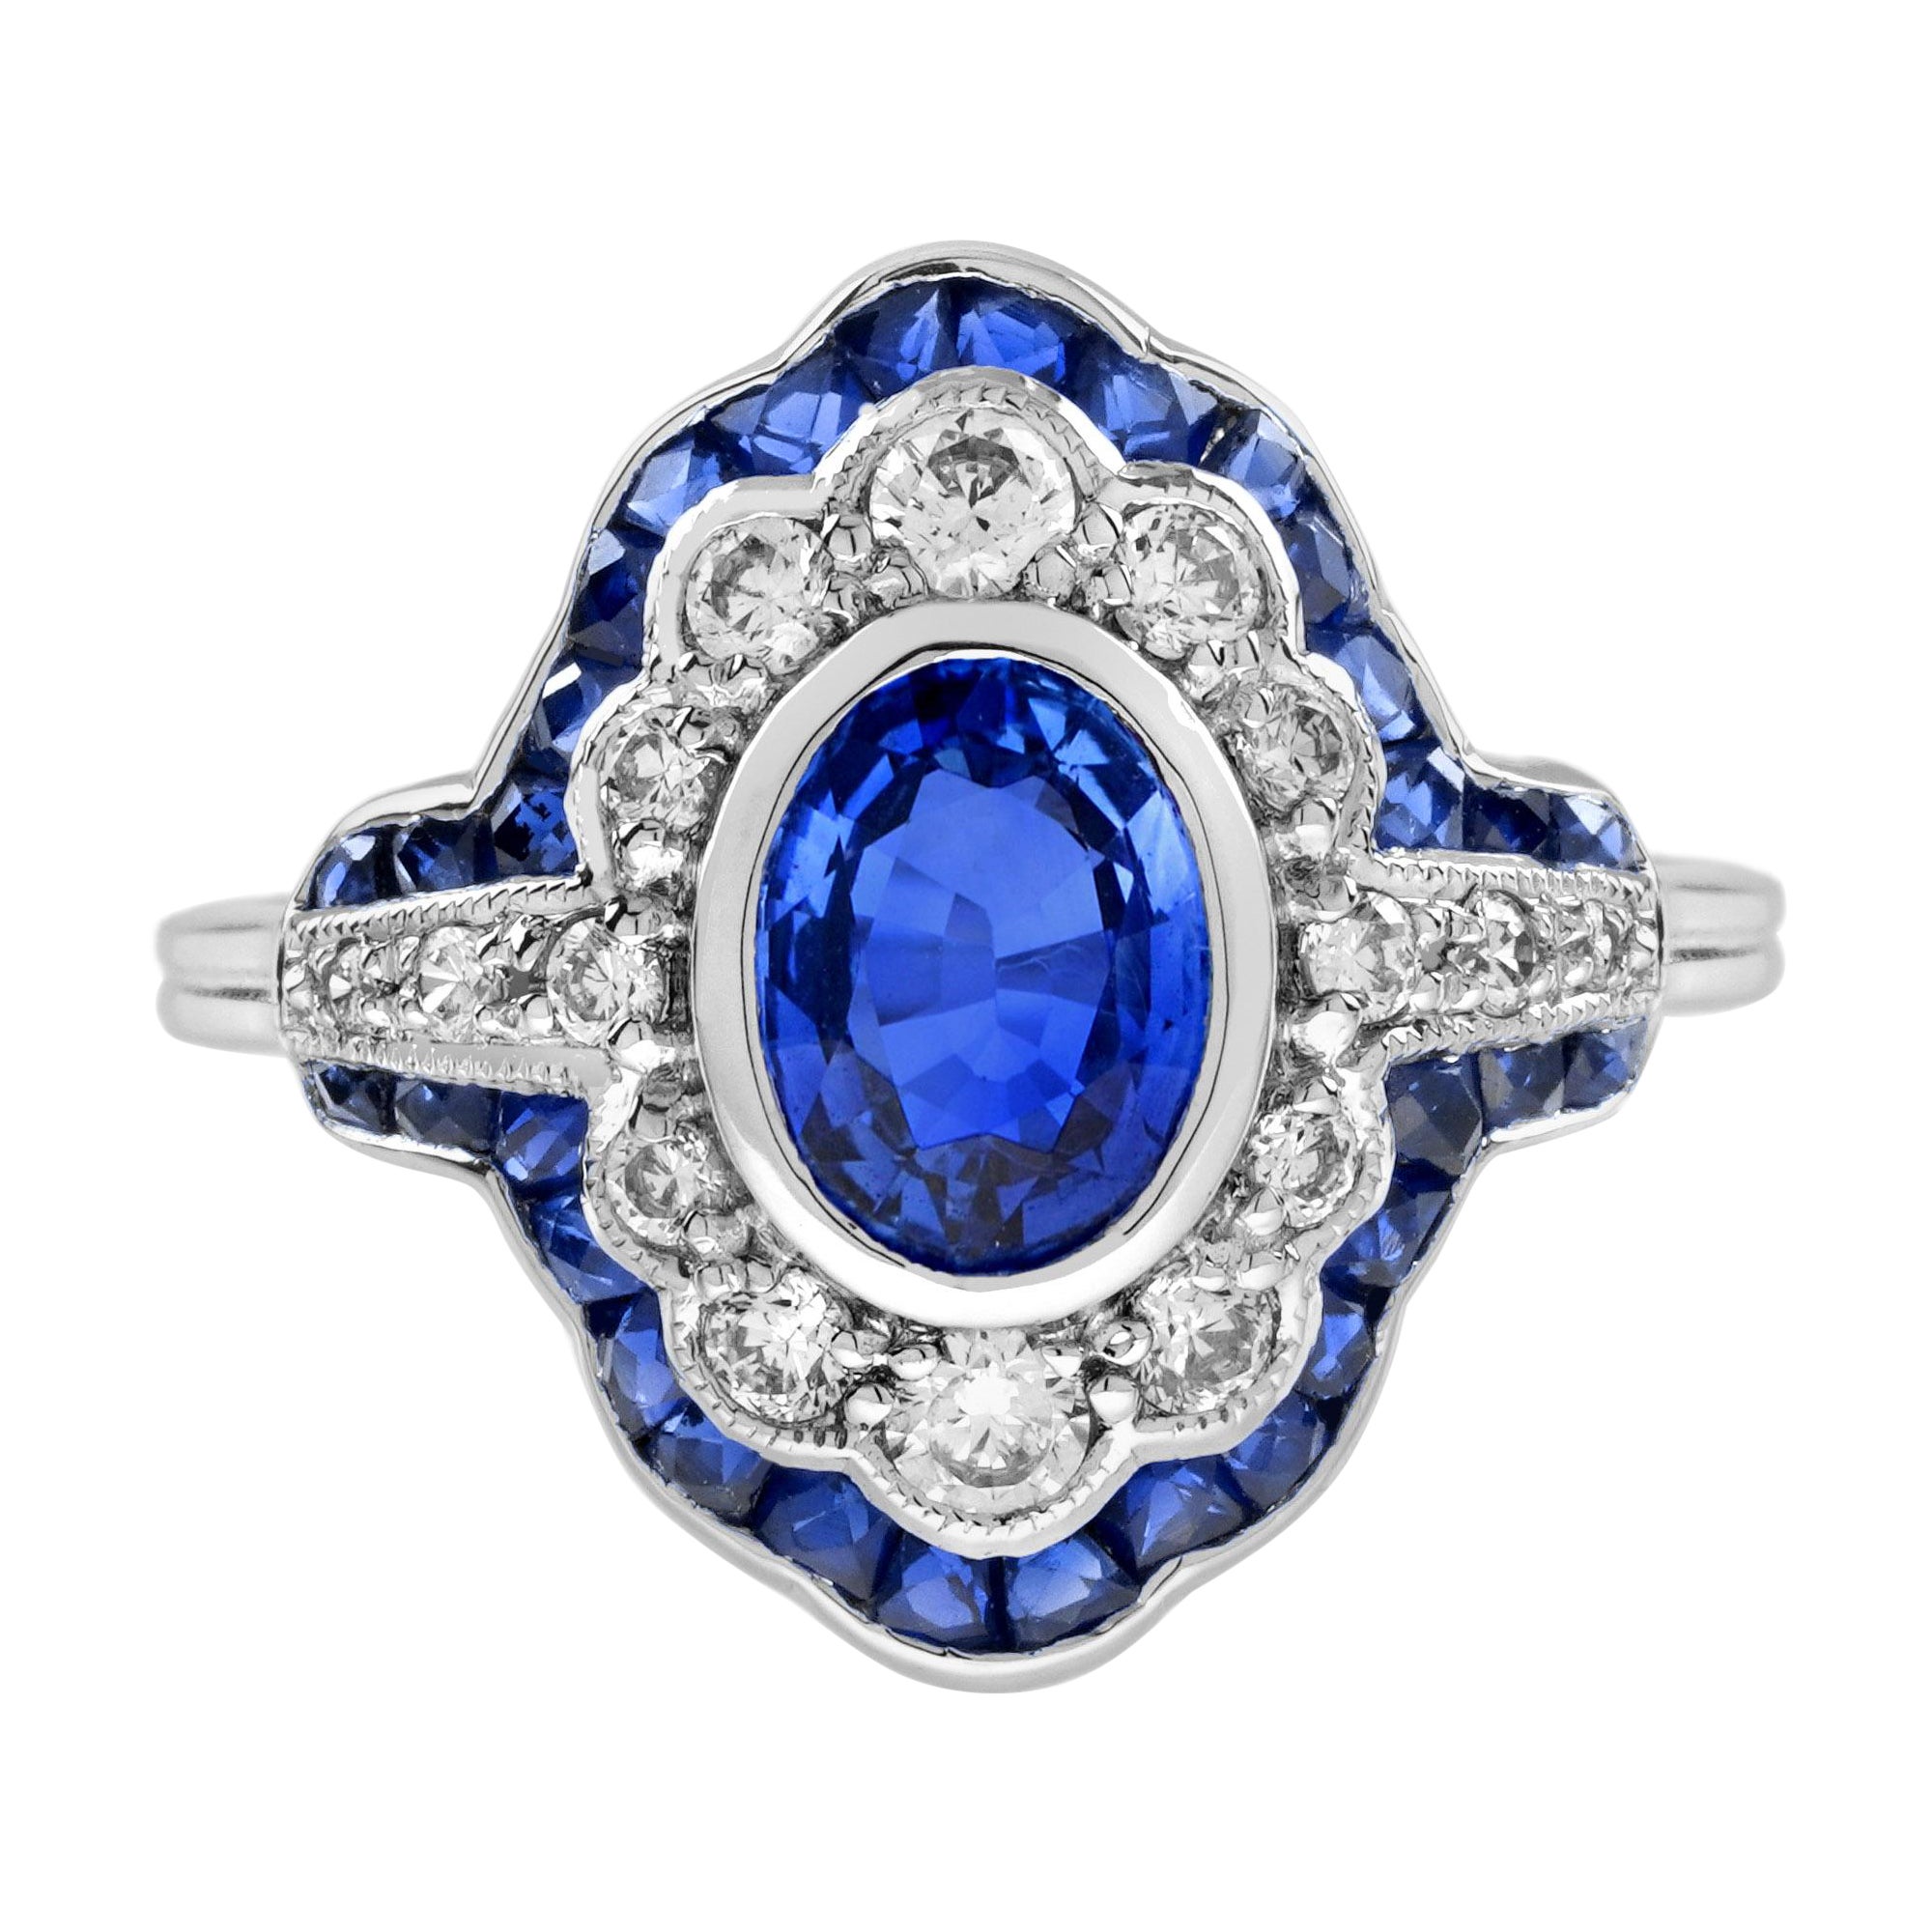 1.6 Ct. Ceylon Sapphire Diamond Art Deco Style Engagement Ring in 18K White Gold For Sale